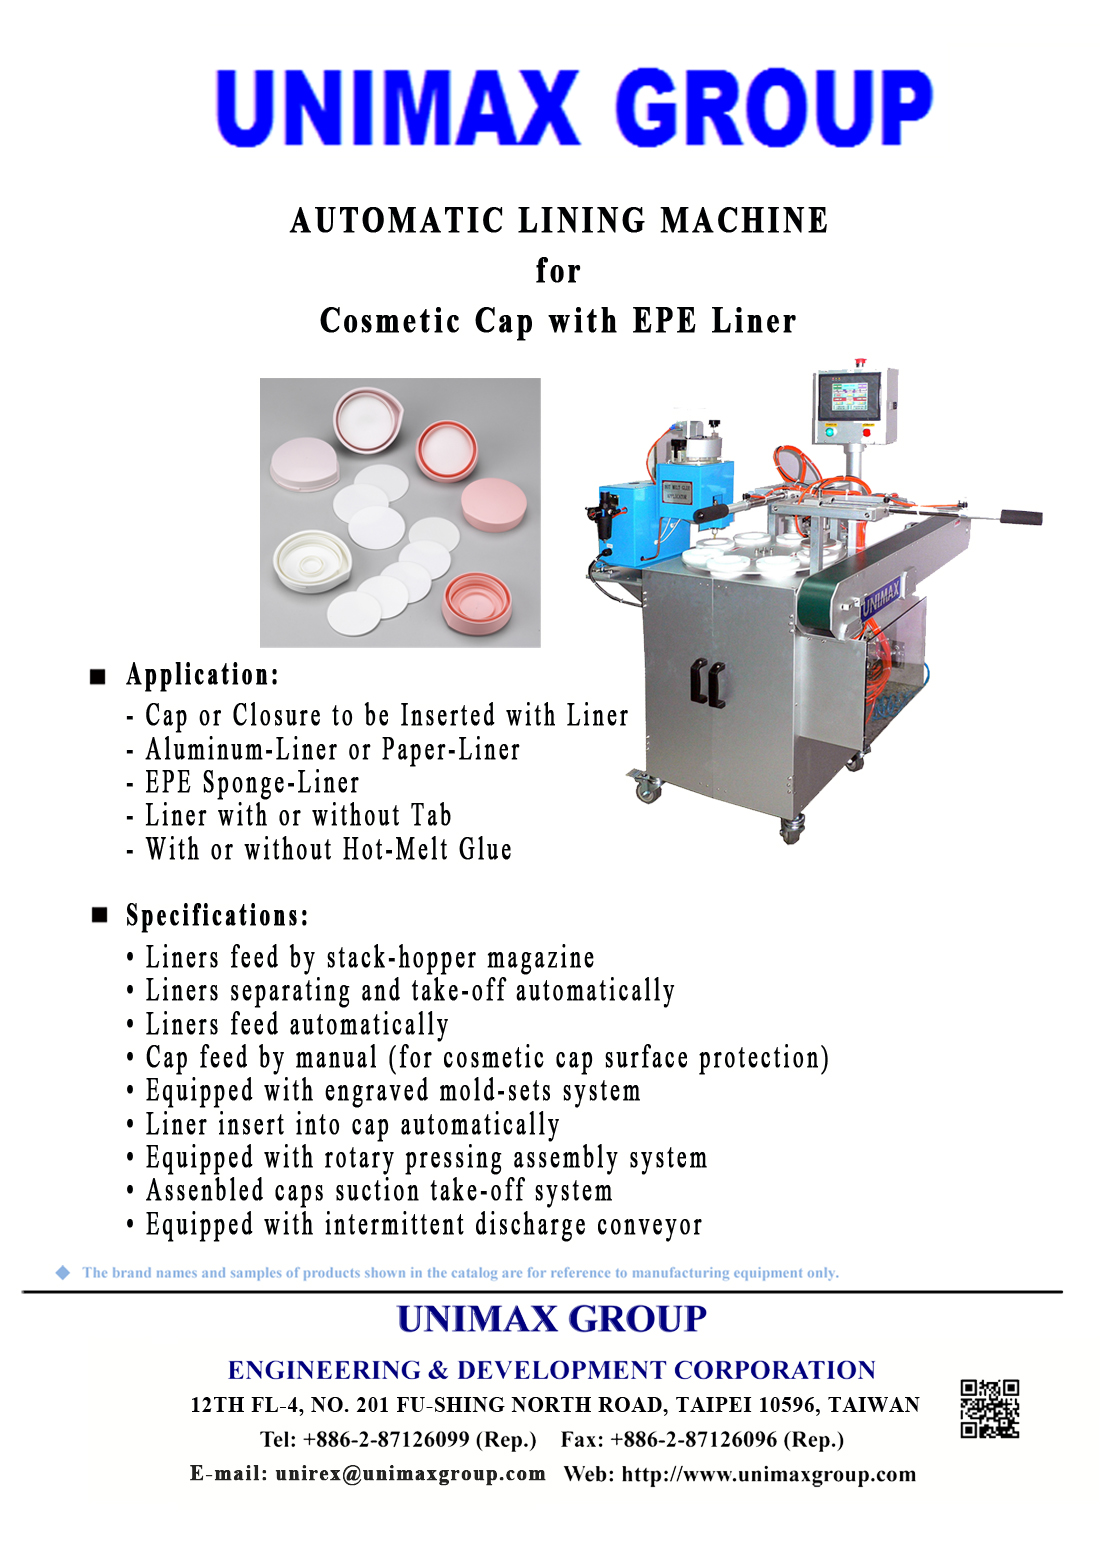 Automatic Lining Machine for Cosmetic Cap with EPE Liner